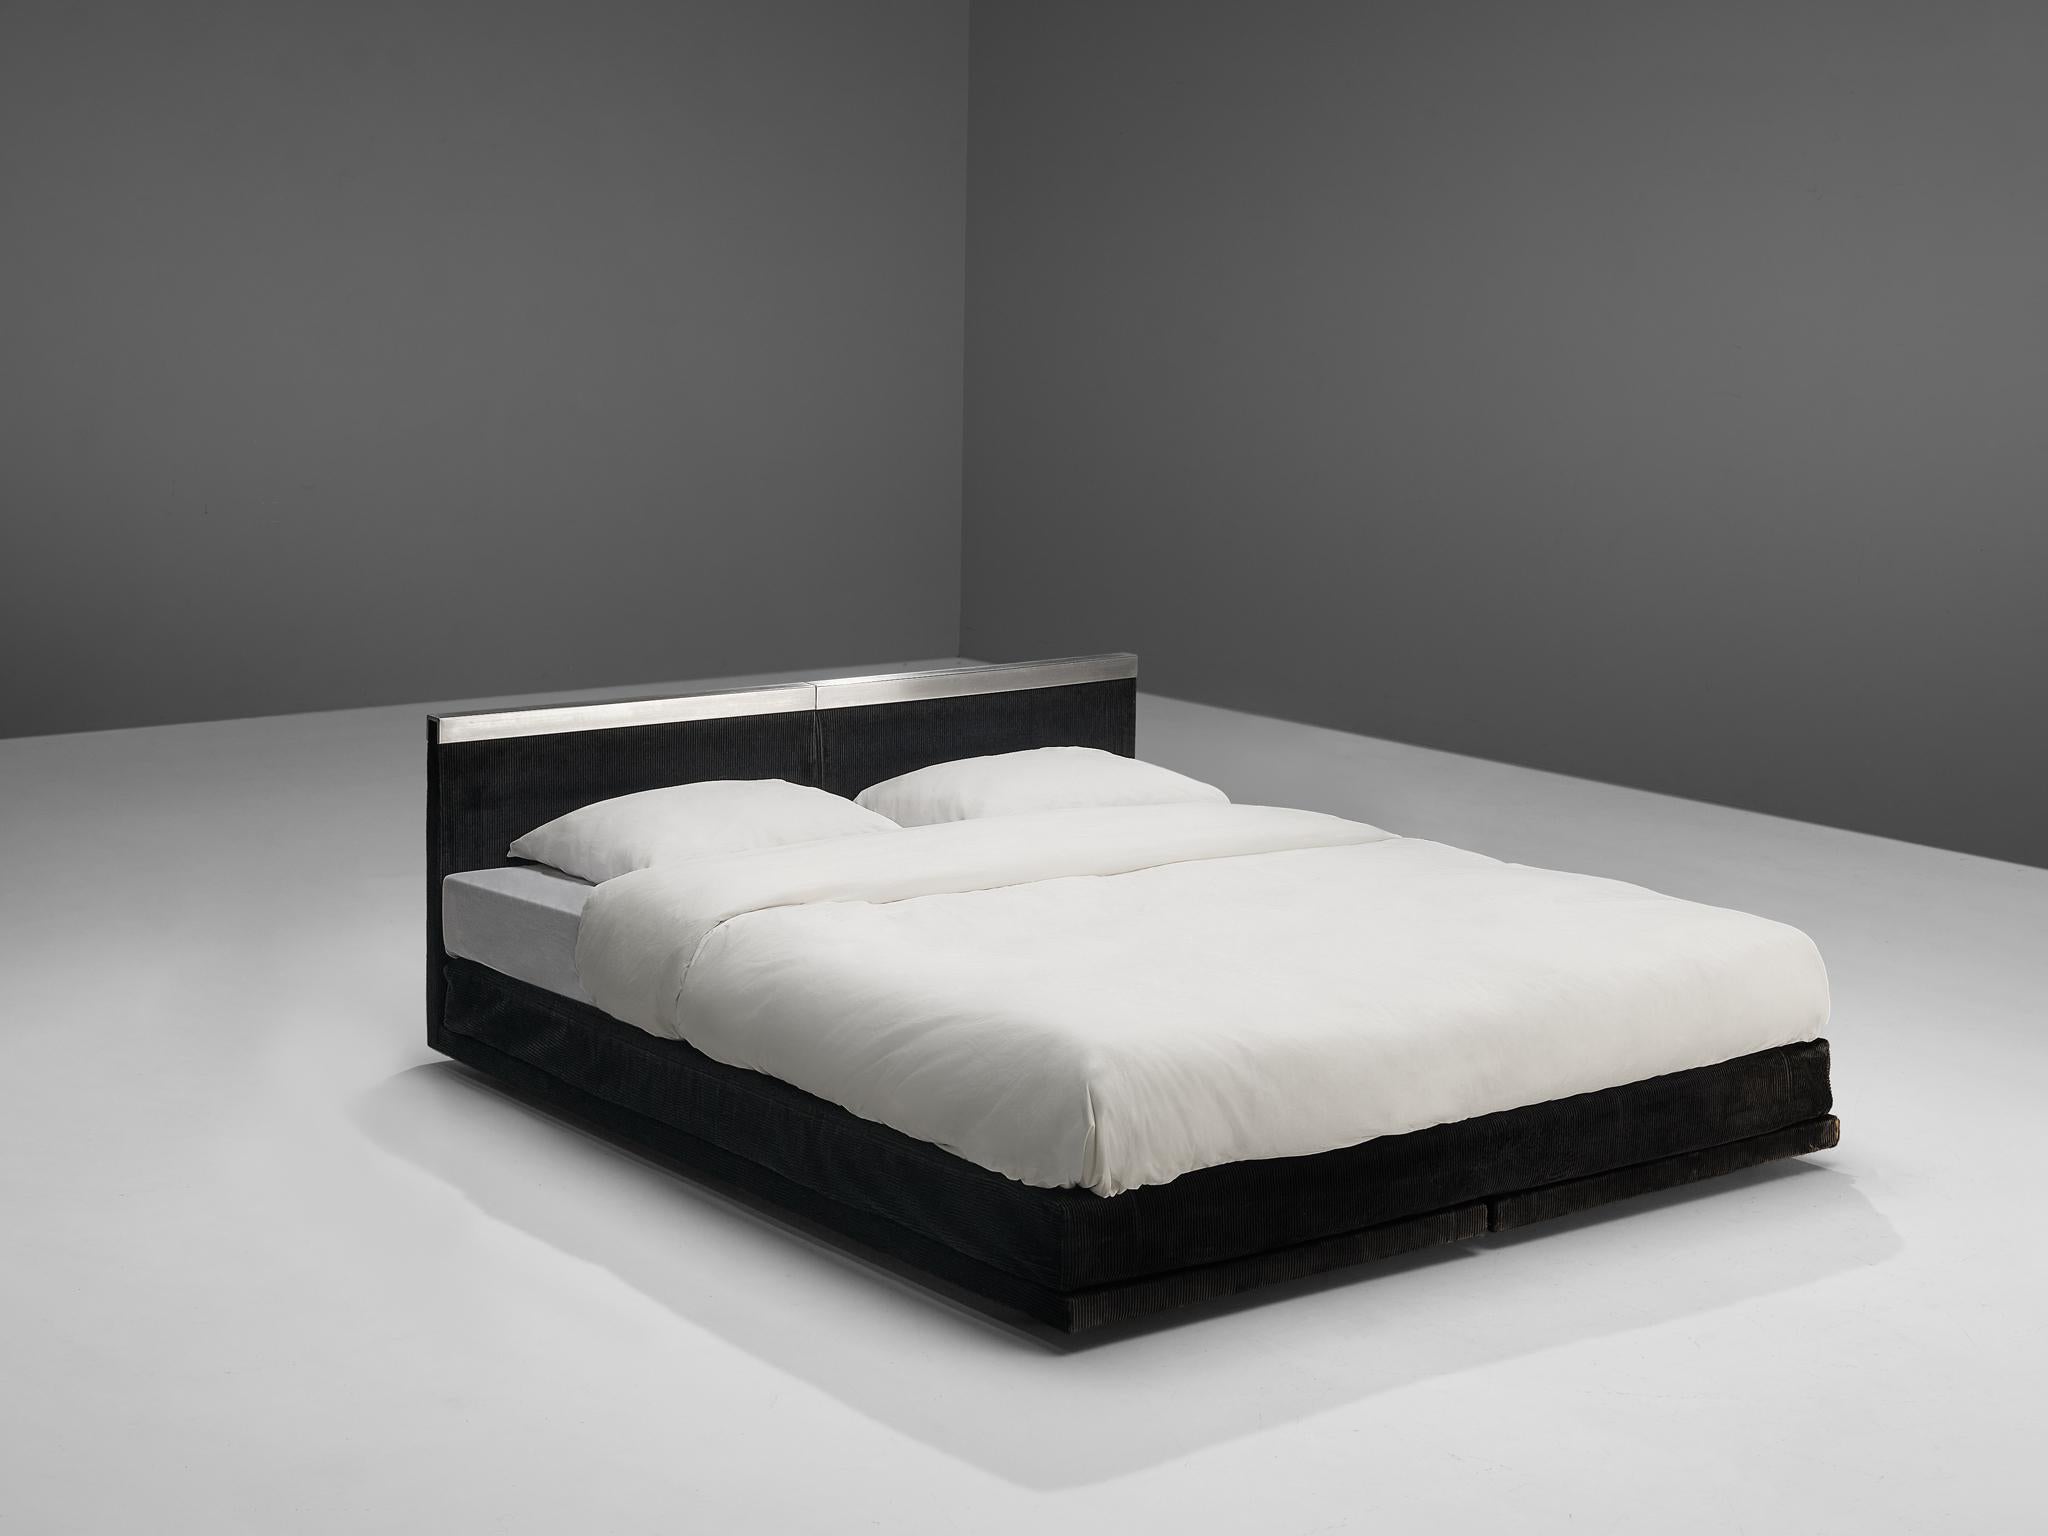 Bazzani, bed, black upholstery, aluminum, Italy, circa 1975
Unique custom-made bed in black upholstery with aluminum detailing on the headrest. This bed has been manufactured by Bazzani for the home of Mariangela Johnson and Roberto Pasqualetti